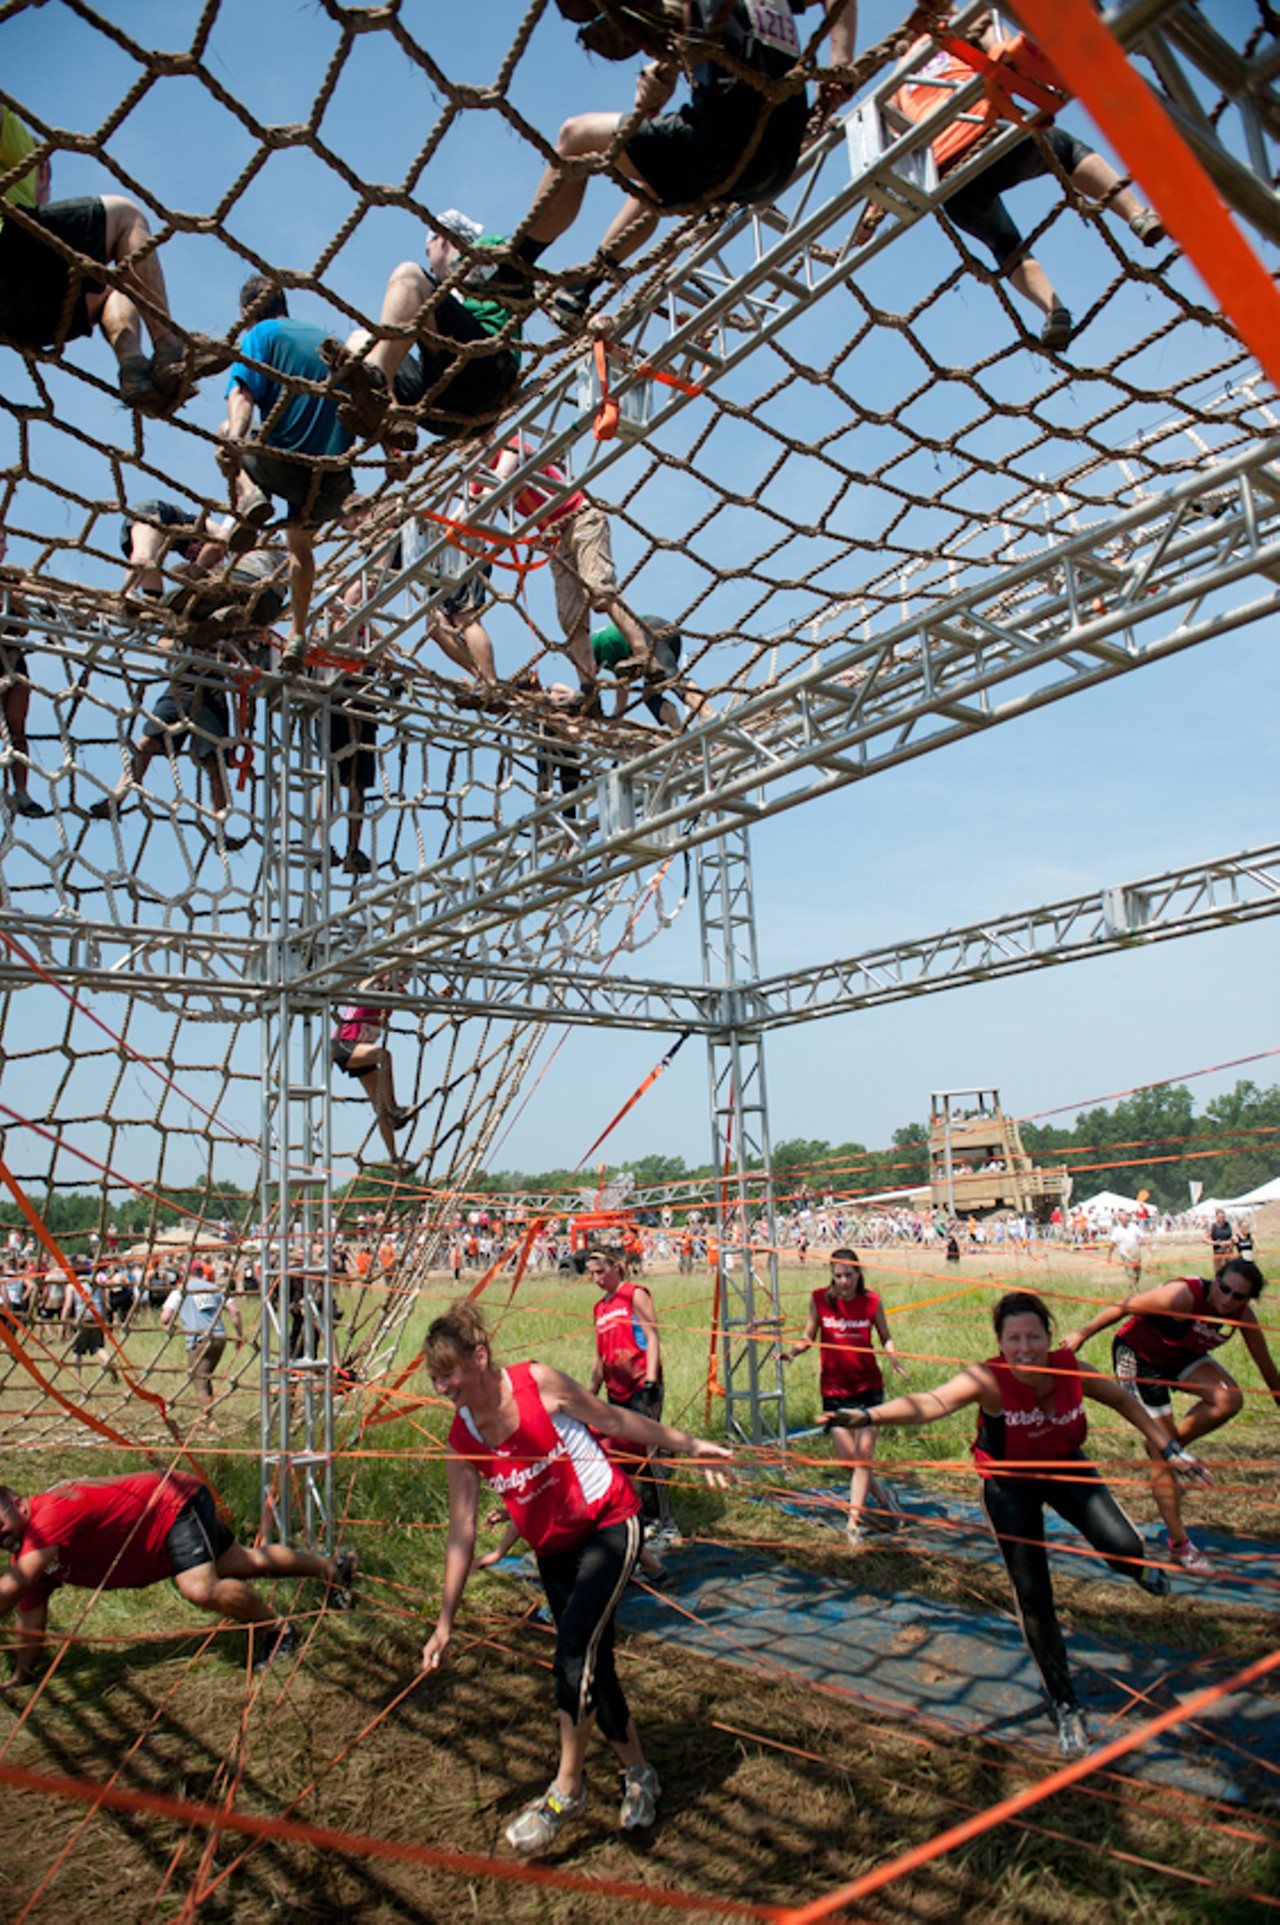 Scenes from Muckruckus MS St. Louis 2012 in which competitors made their way through the many obstacles scattered throughout the 5 mile course.